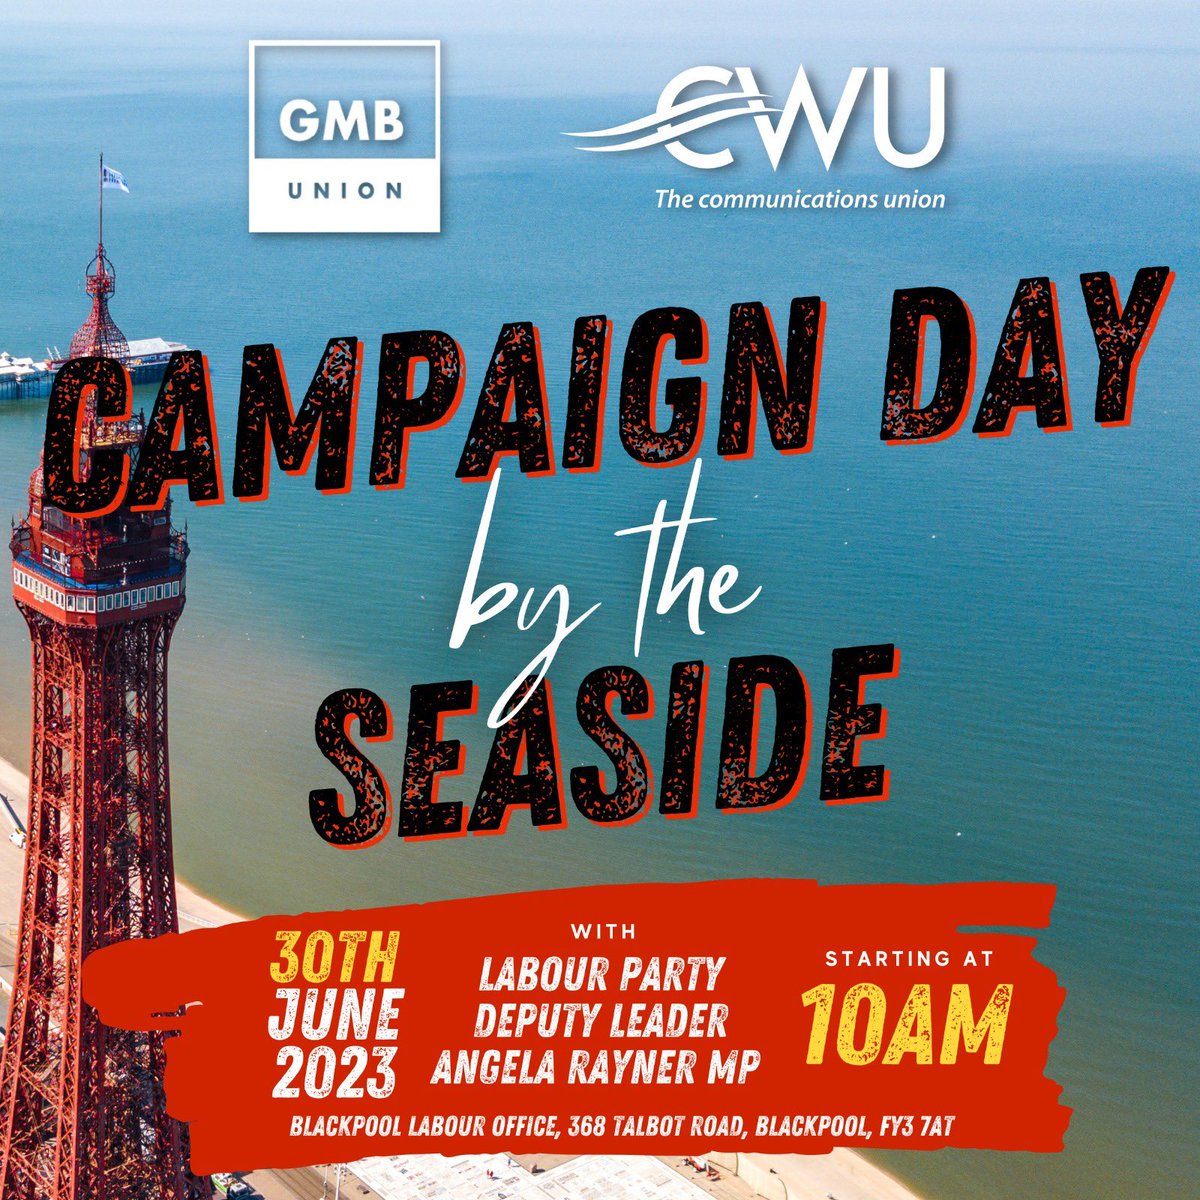 Come and join us for the @GMB_union_NWI and @NWCWU Councillor Network campaign day in #Blackpool with Deputy Leader @AngelaRayner MP. @deniseNWI @GMBCouncillors 

Sign up at bit.ly/GMBandCWU

#Chris4BlackpoolSouth